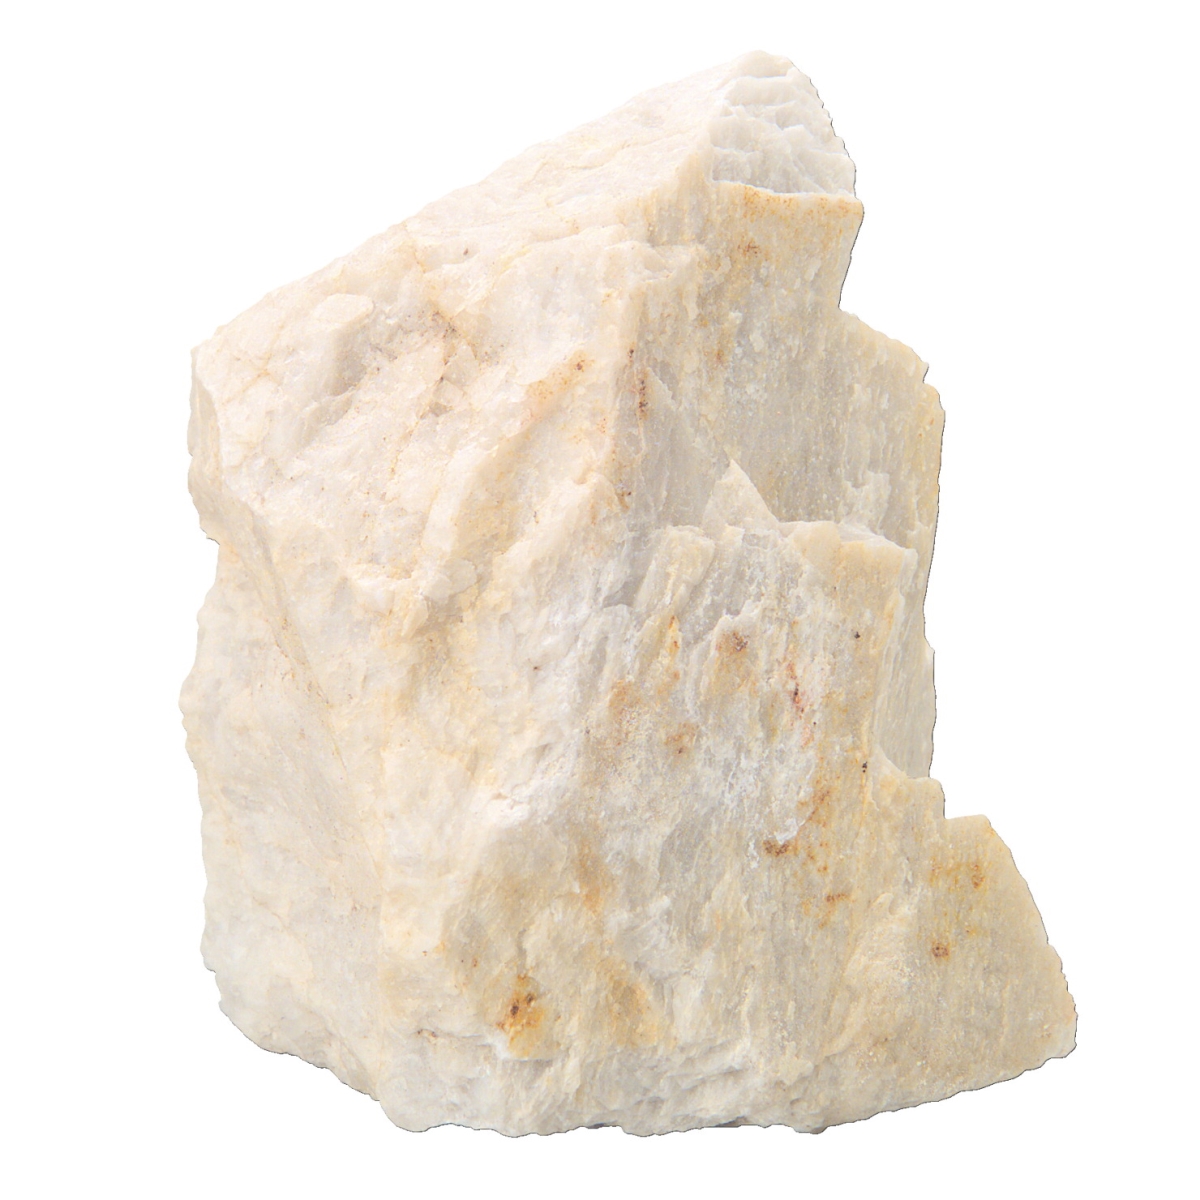 587221 Student White Microcline Feldspar Cleavages - Pack Of 10